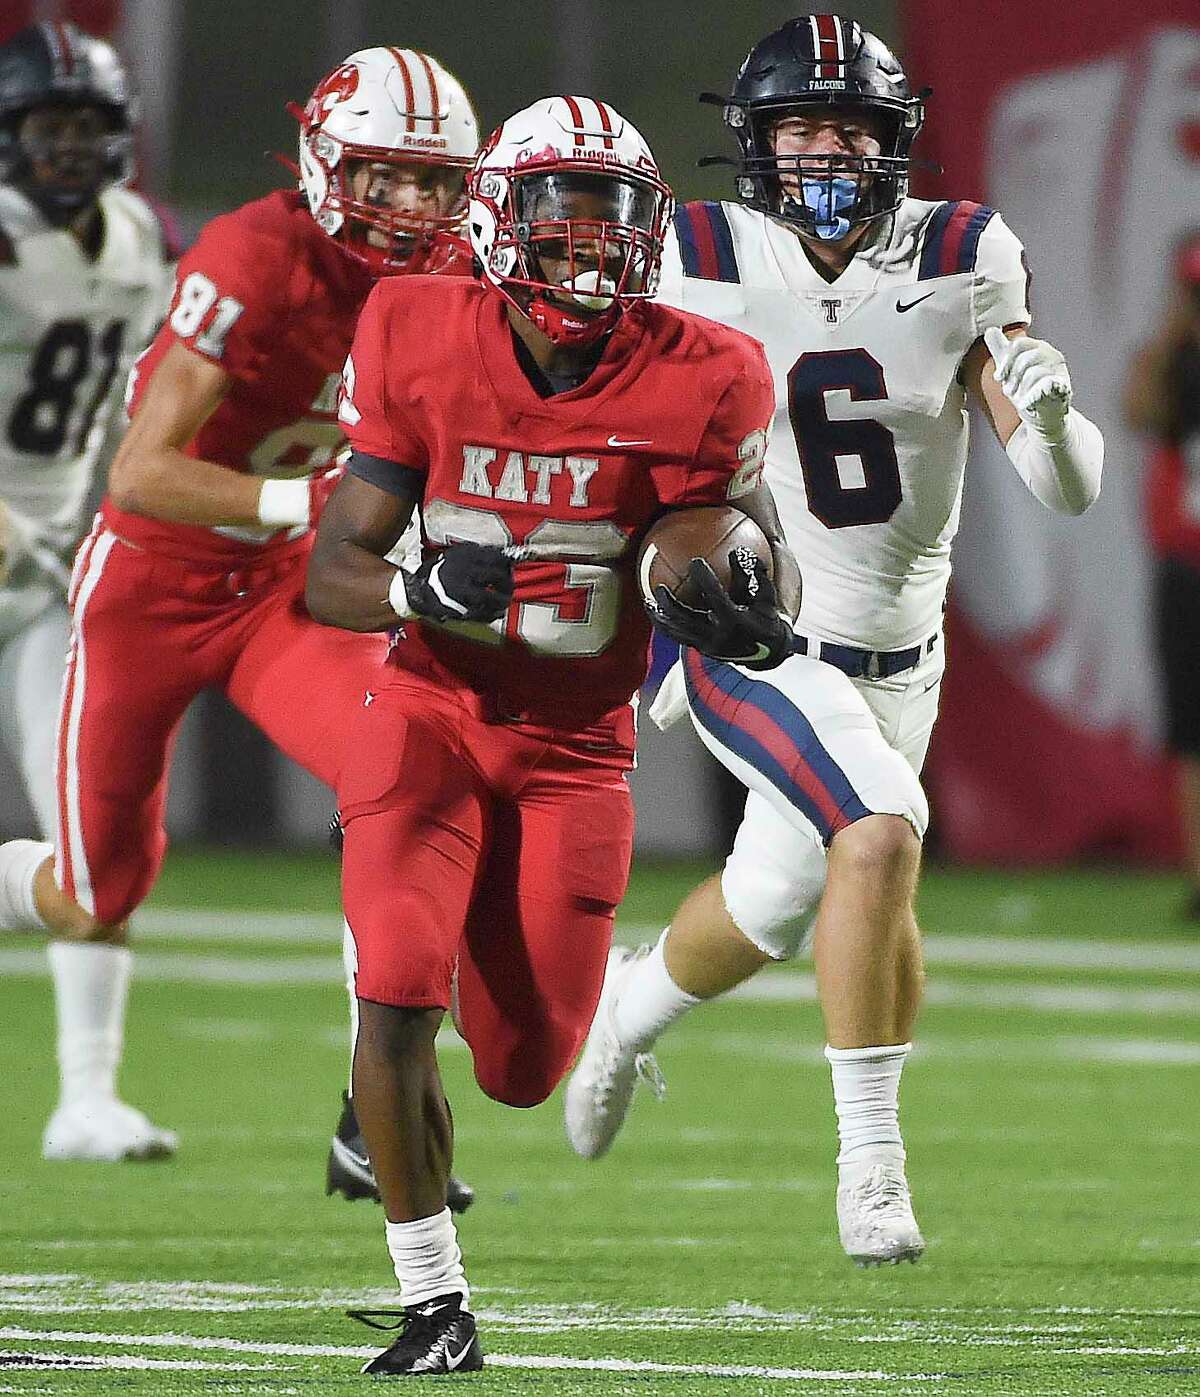 Katy running back Seth Davis, left, runs for a touchdown during the second half of a high school football game against Tompkins, Friday, Oct. 1, 2021, in Katy.